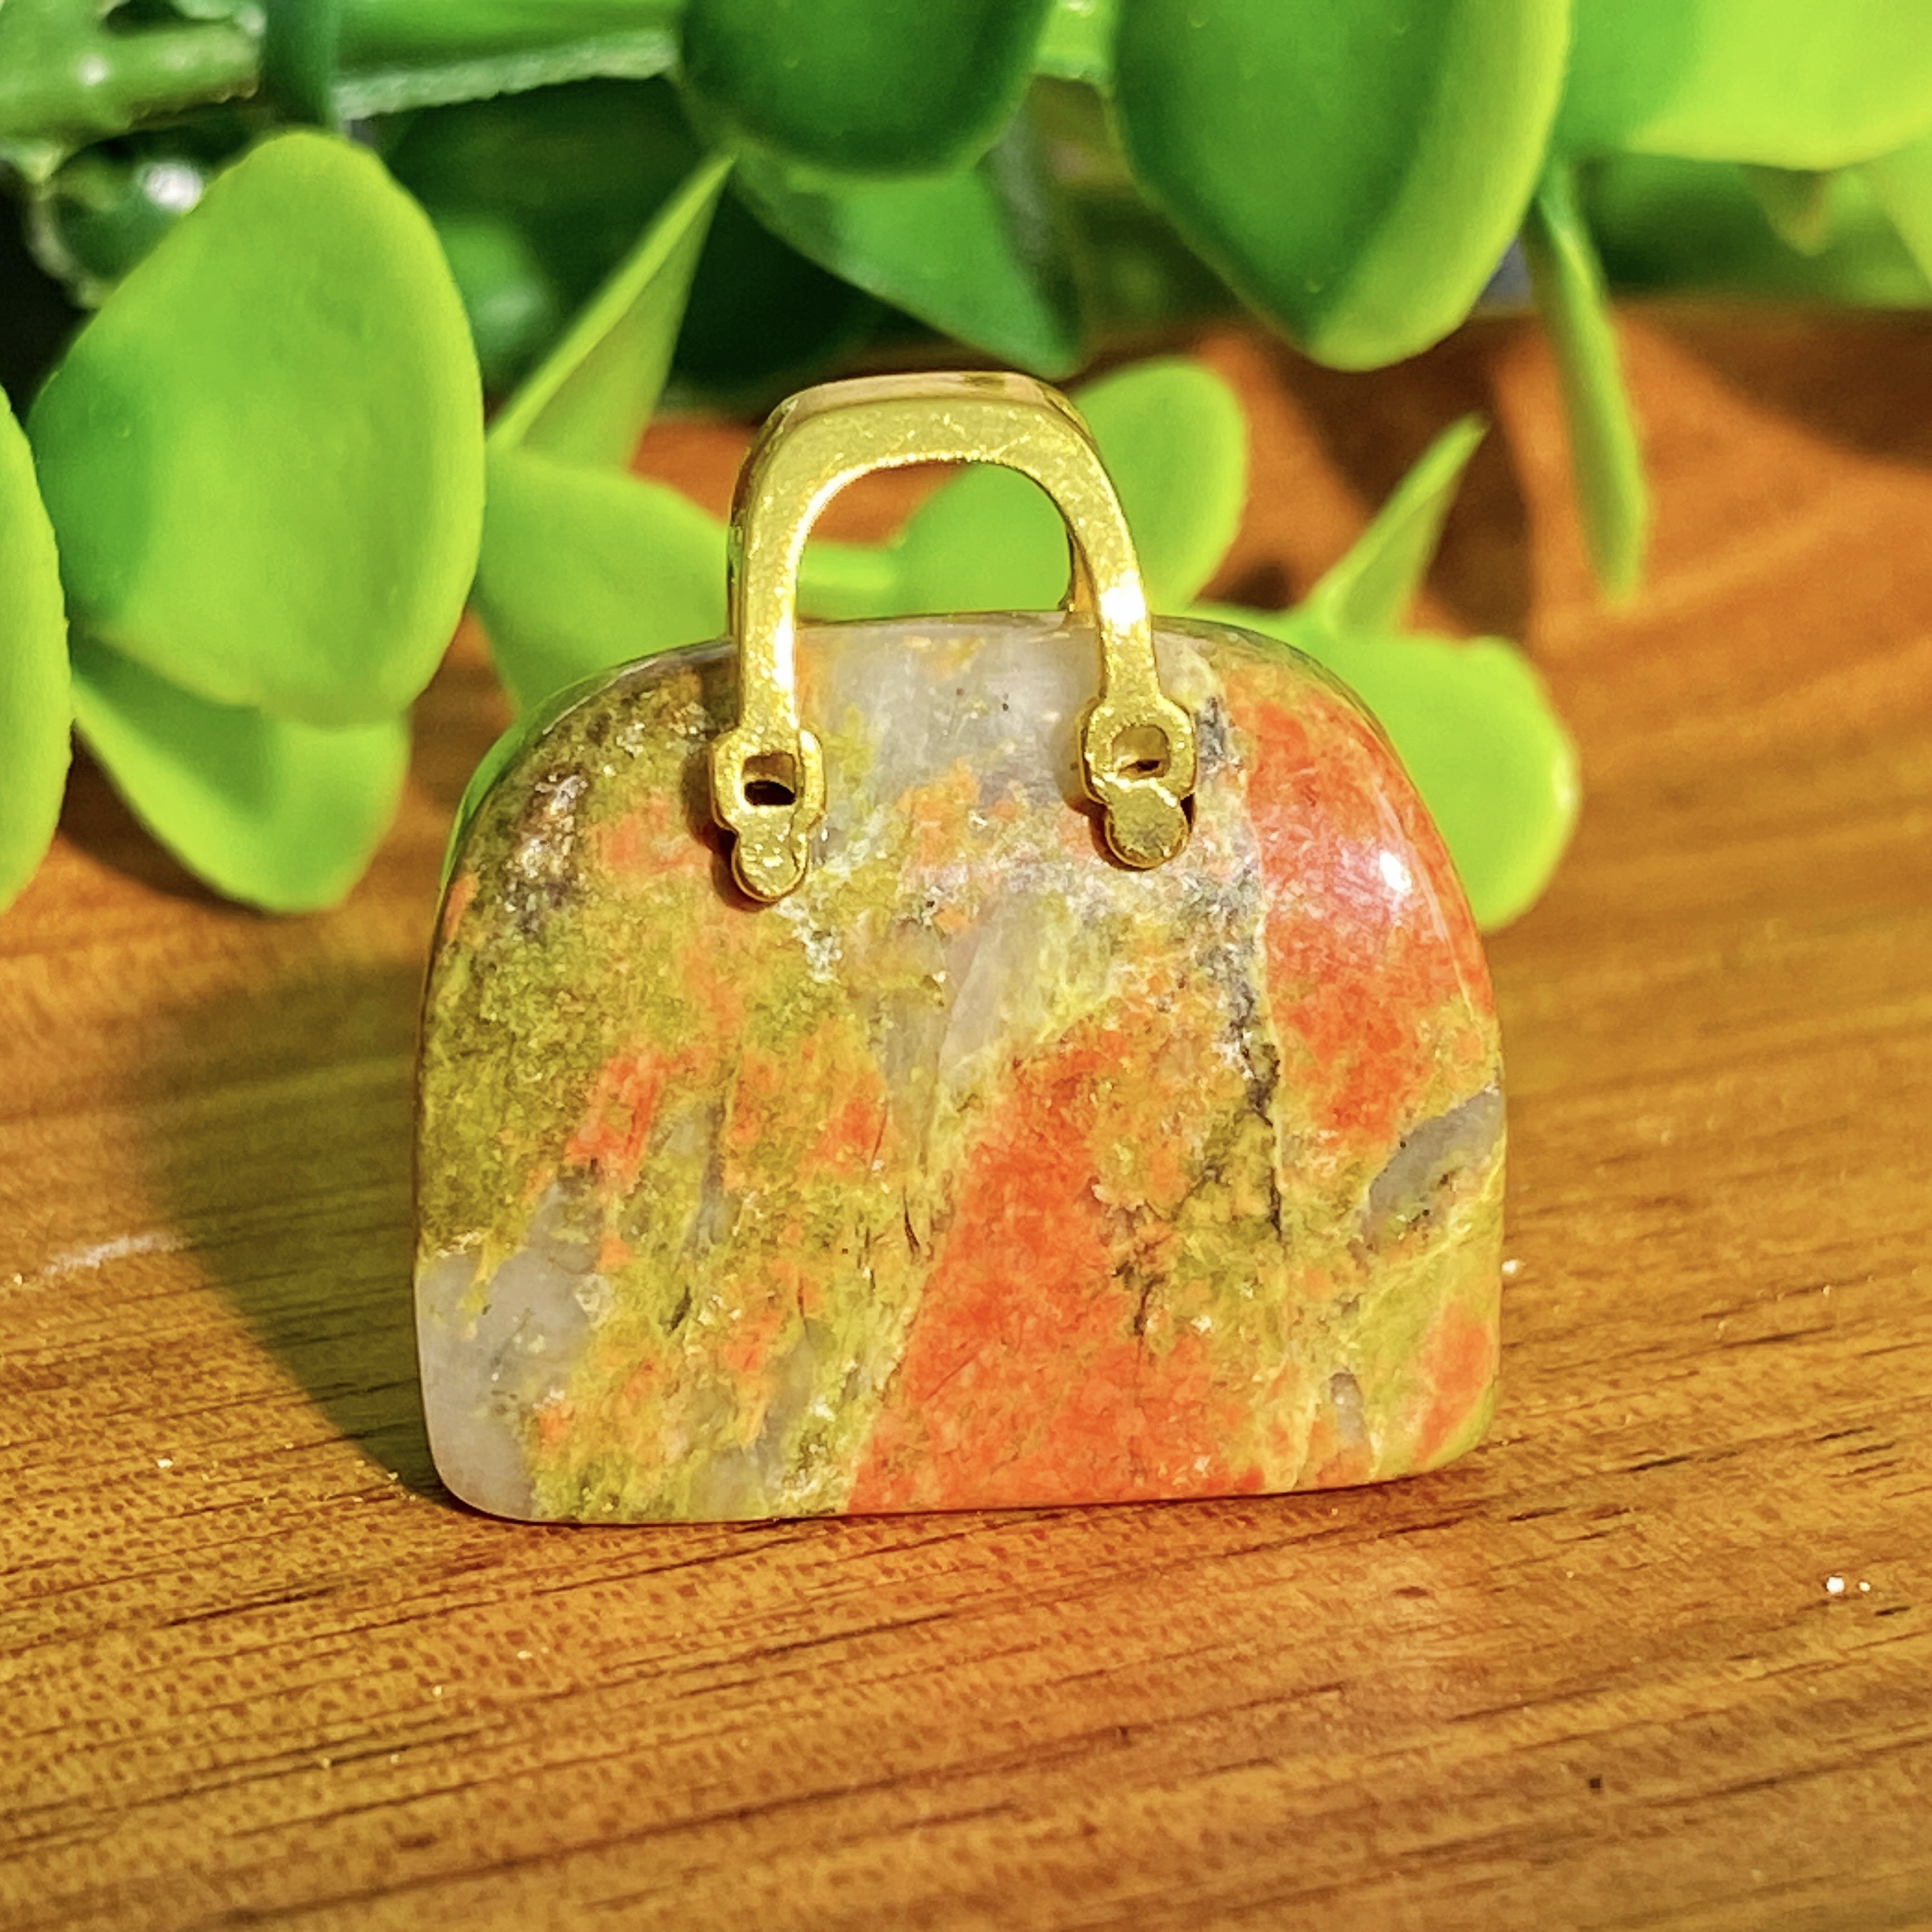 Mini Crystal Carving Women Bag Home Decoration 